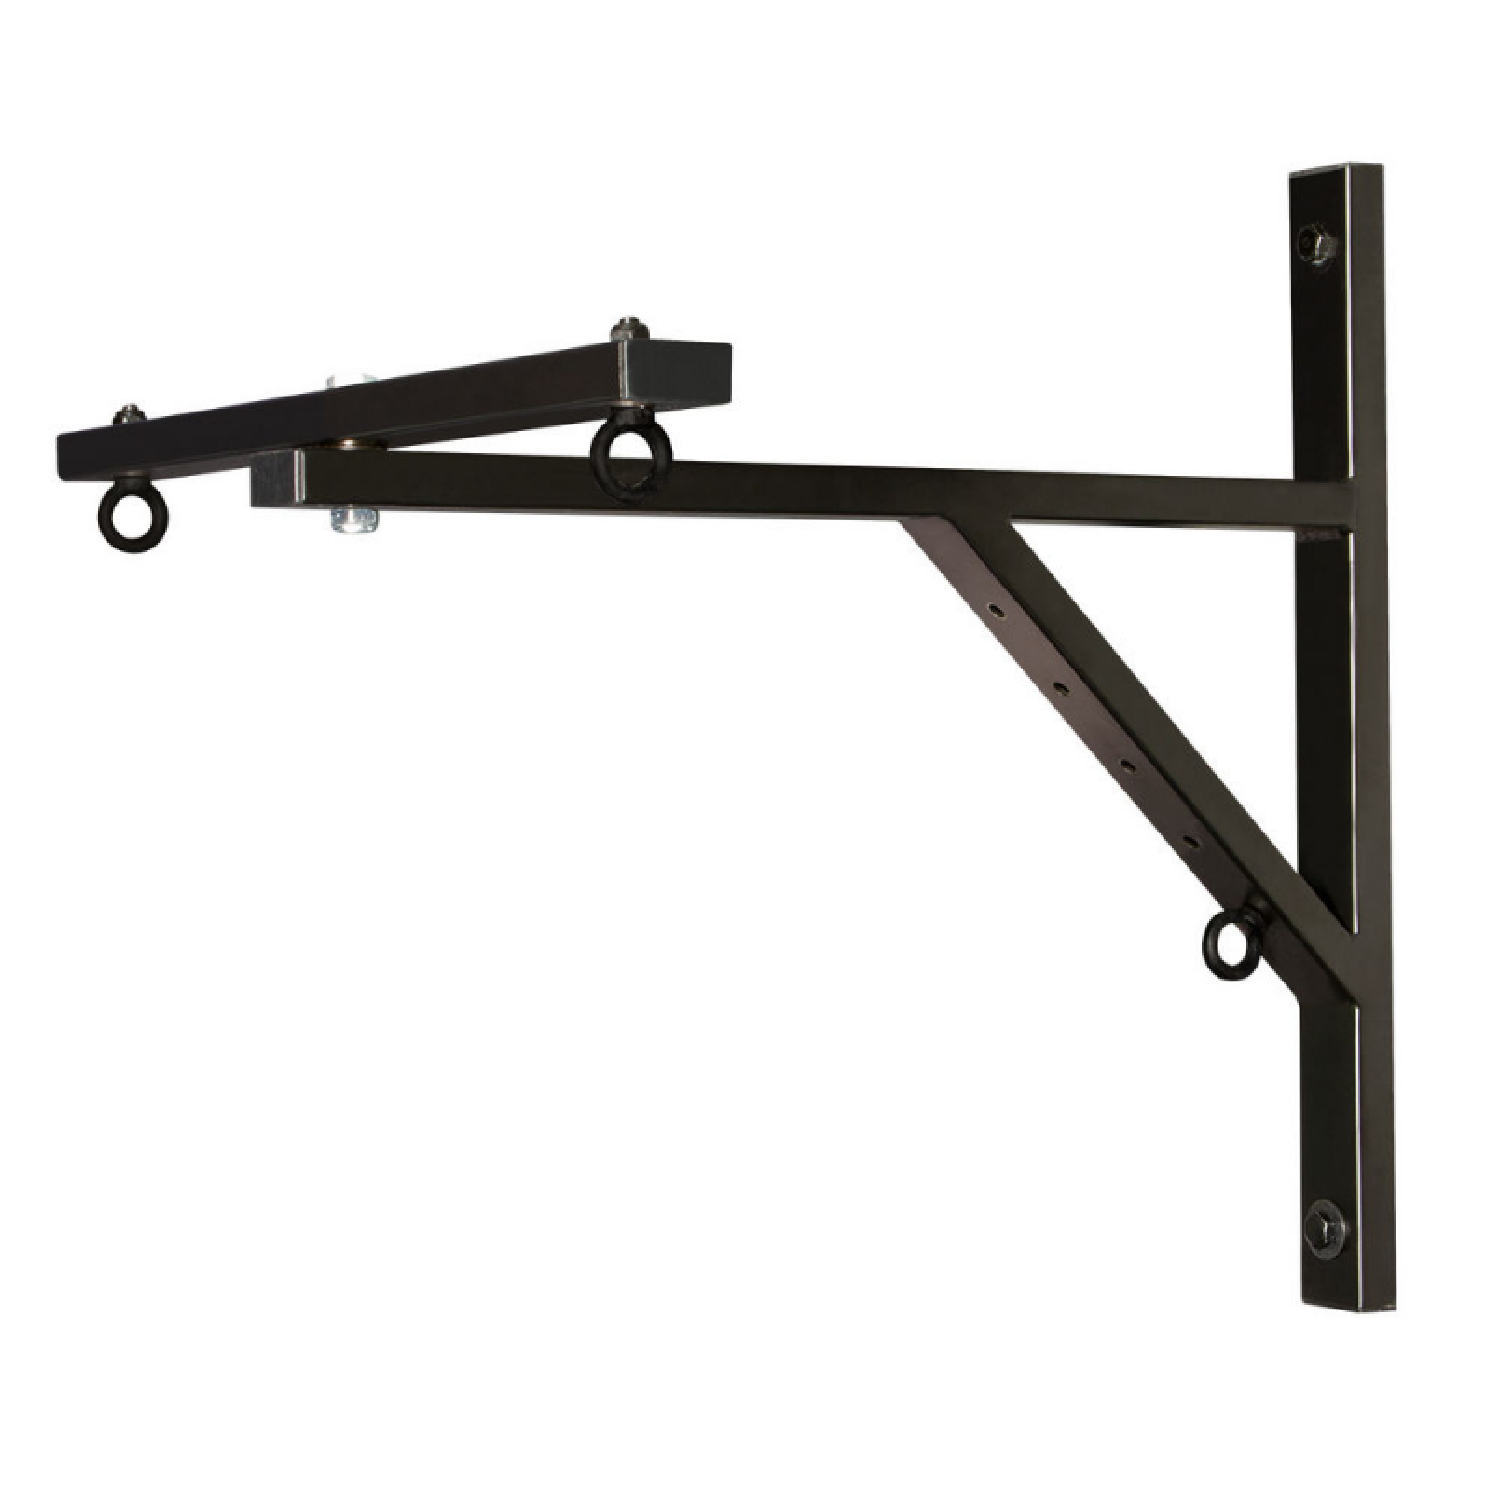 Hanging Speaker Bracket Length 17 ¾ Inches, Mounting 2 Bolt Installation per Mount 4 Lag Bolts Included (Sold By Pair)   SS7990 on stage stands